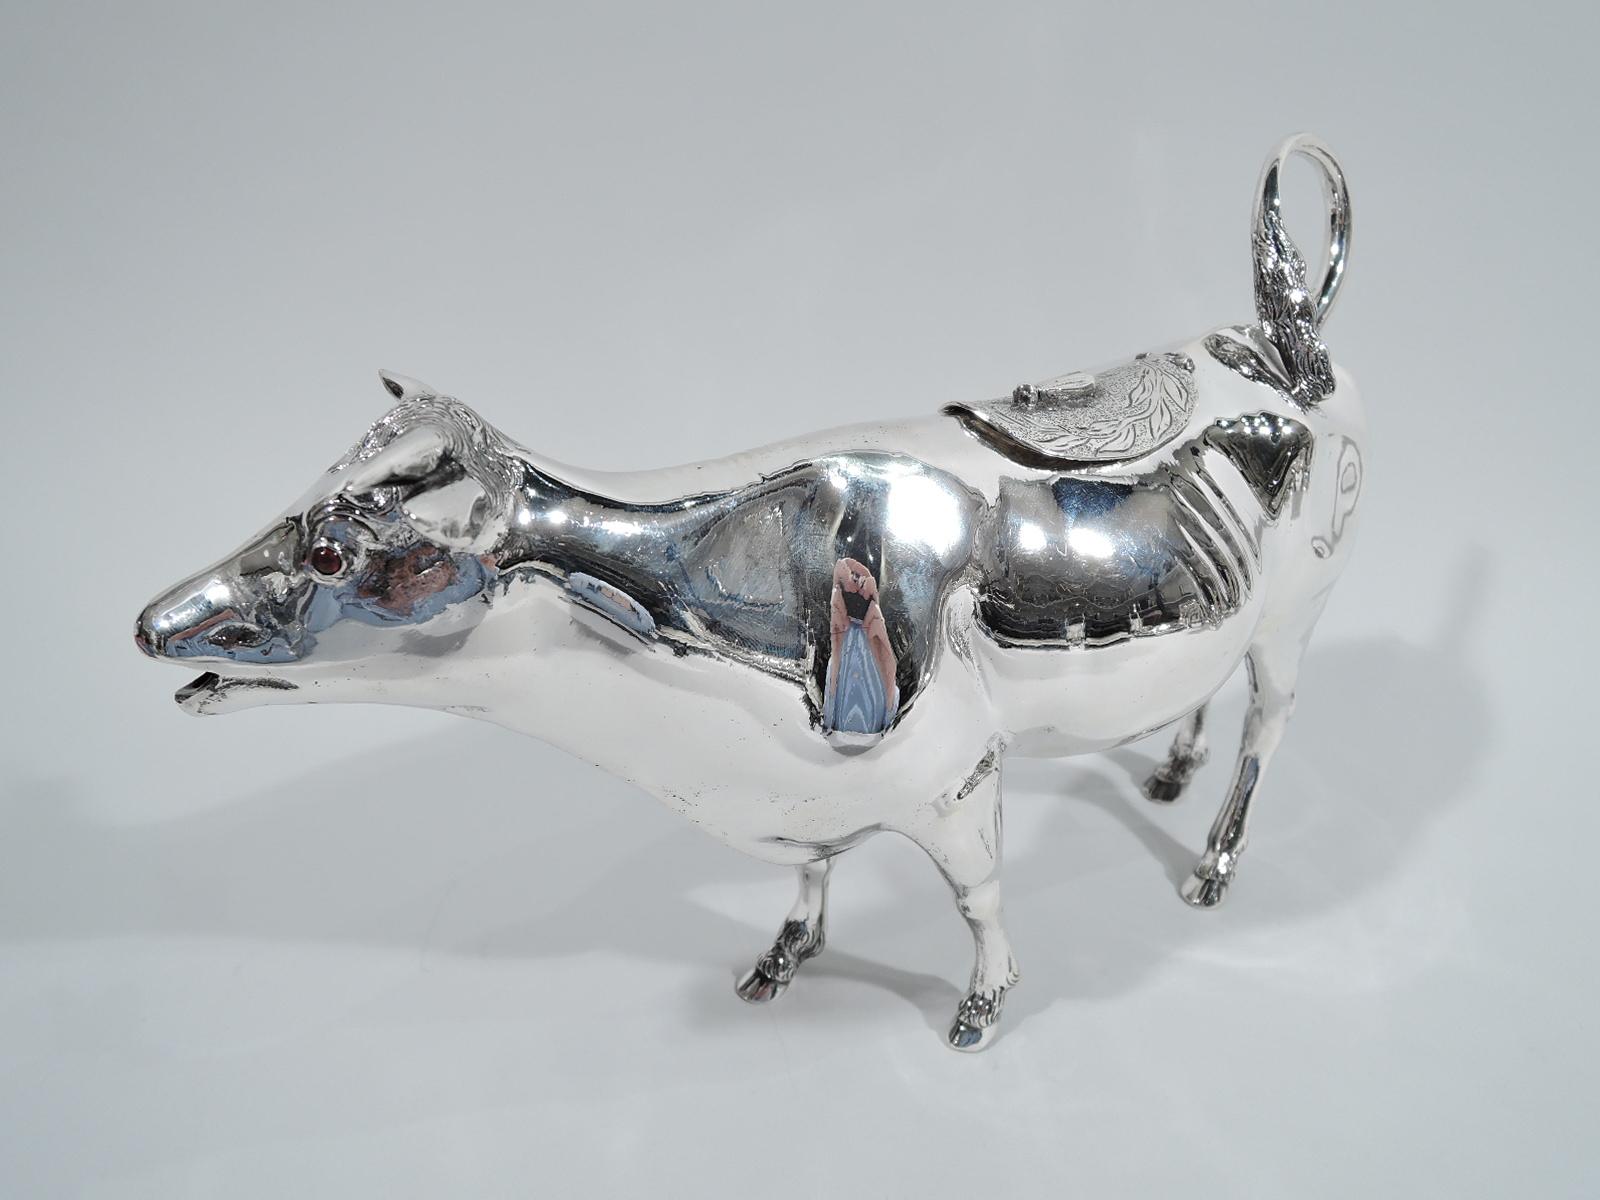 Turn-of-the-century German 800 silver cow creamer. Imported to the United States by Buchholz & Zelt in New York. Stocky body with flexed ears, flicked-back tail handle, and tooled and hinged back flap with applied fly finial. A gentle, sensitive